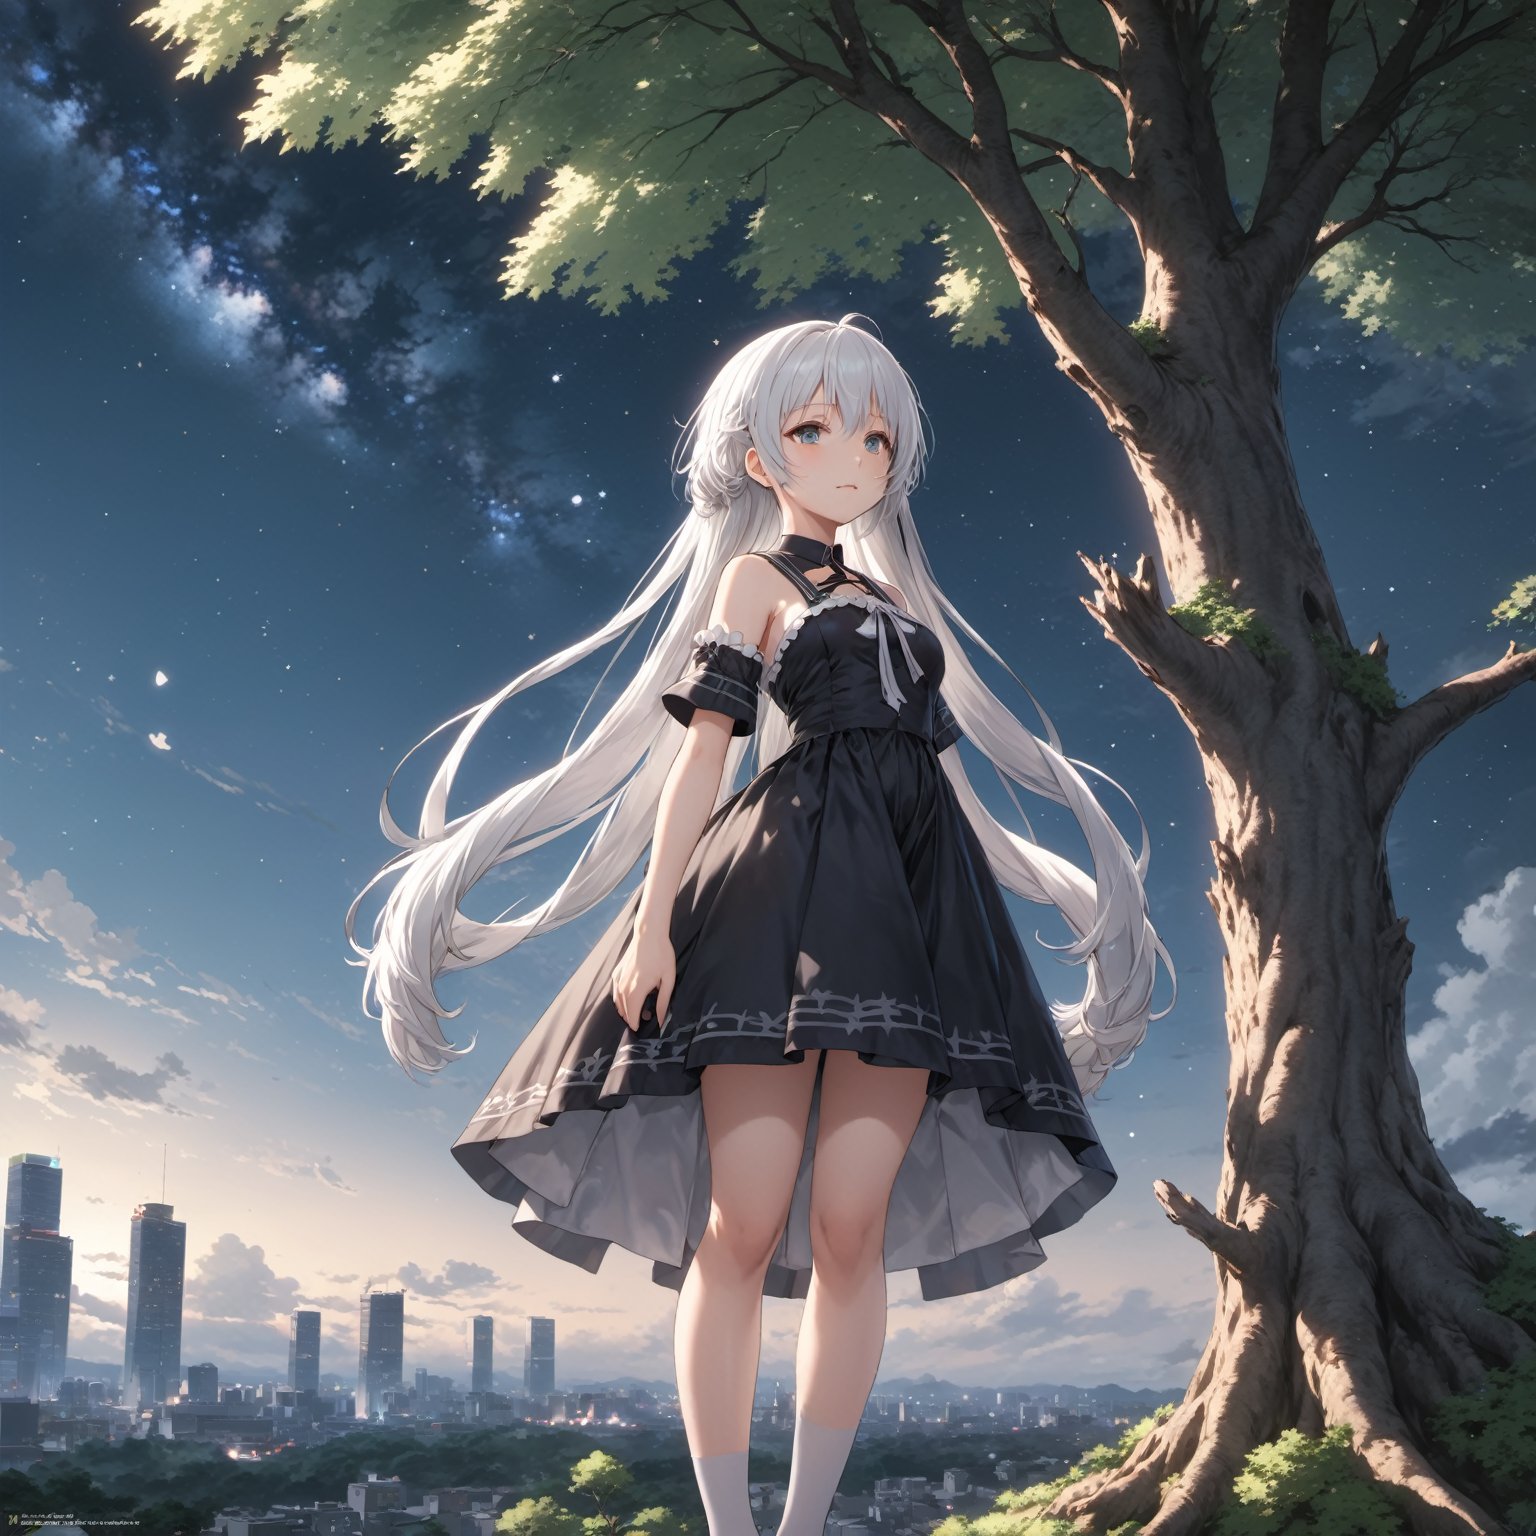 The background is a city, perfect white-haired girl, loli in dress, white-haired, white-haired god, cute anime waifu in beautiful clothes, gray-haired, best anime 4k konachan wallpaper, little curve loli, guvez on Pixiv ArtStation, white-haired girl, nightcore, standing on a tree, looking up at the stars, face super detailed
